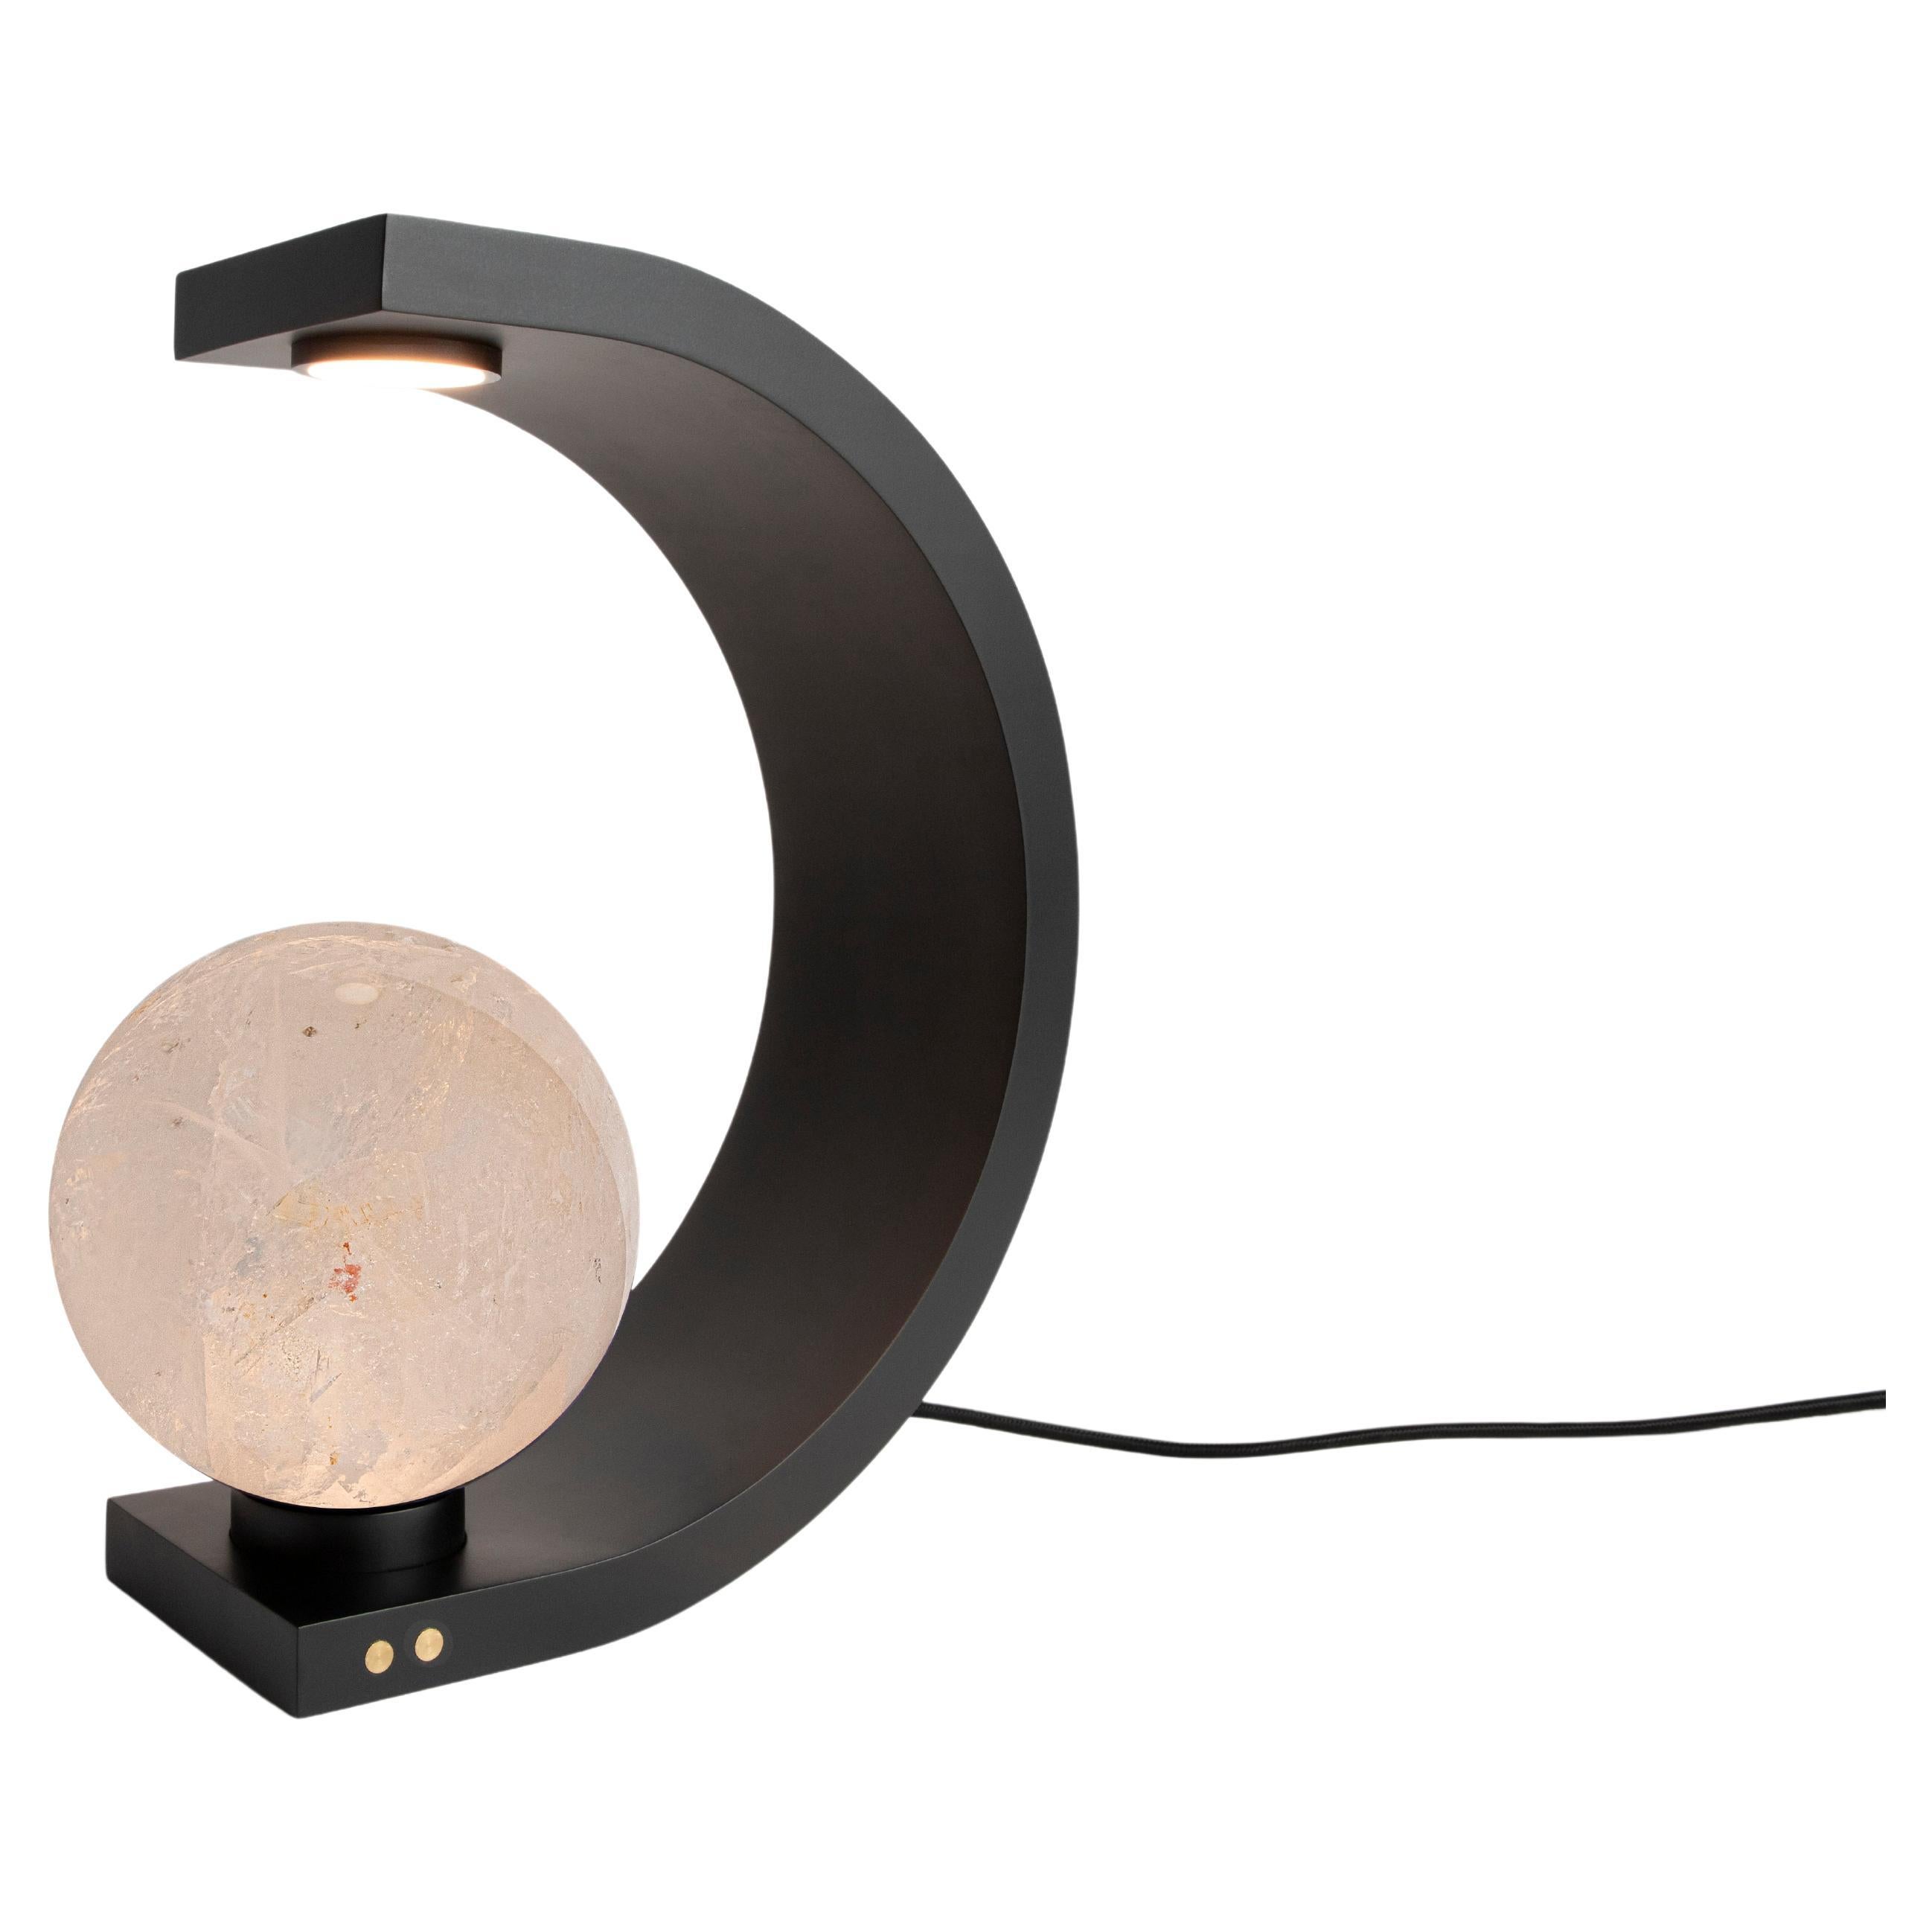 Hotai II Table Lamp by Sten Studio, Represented by Tuleste Factory